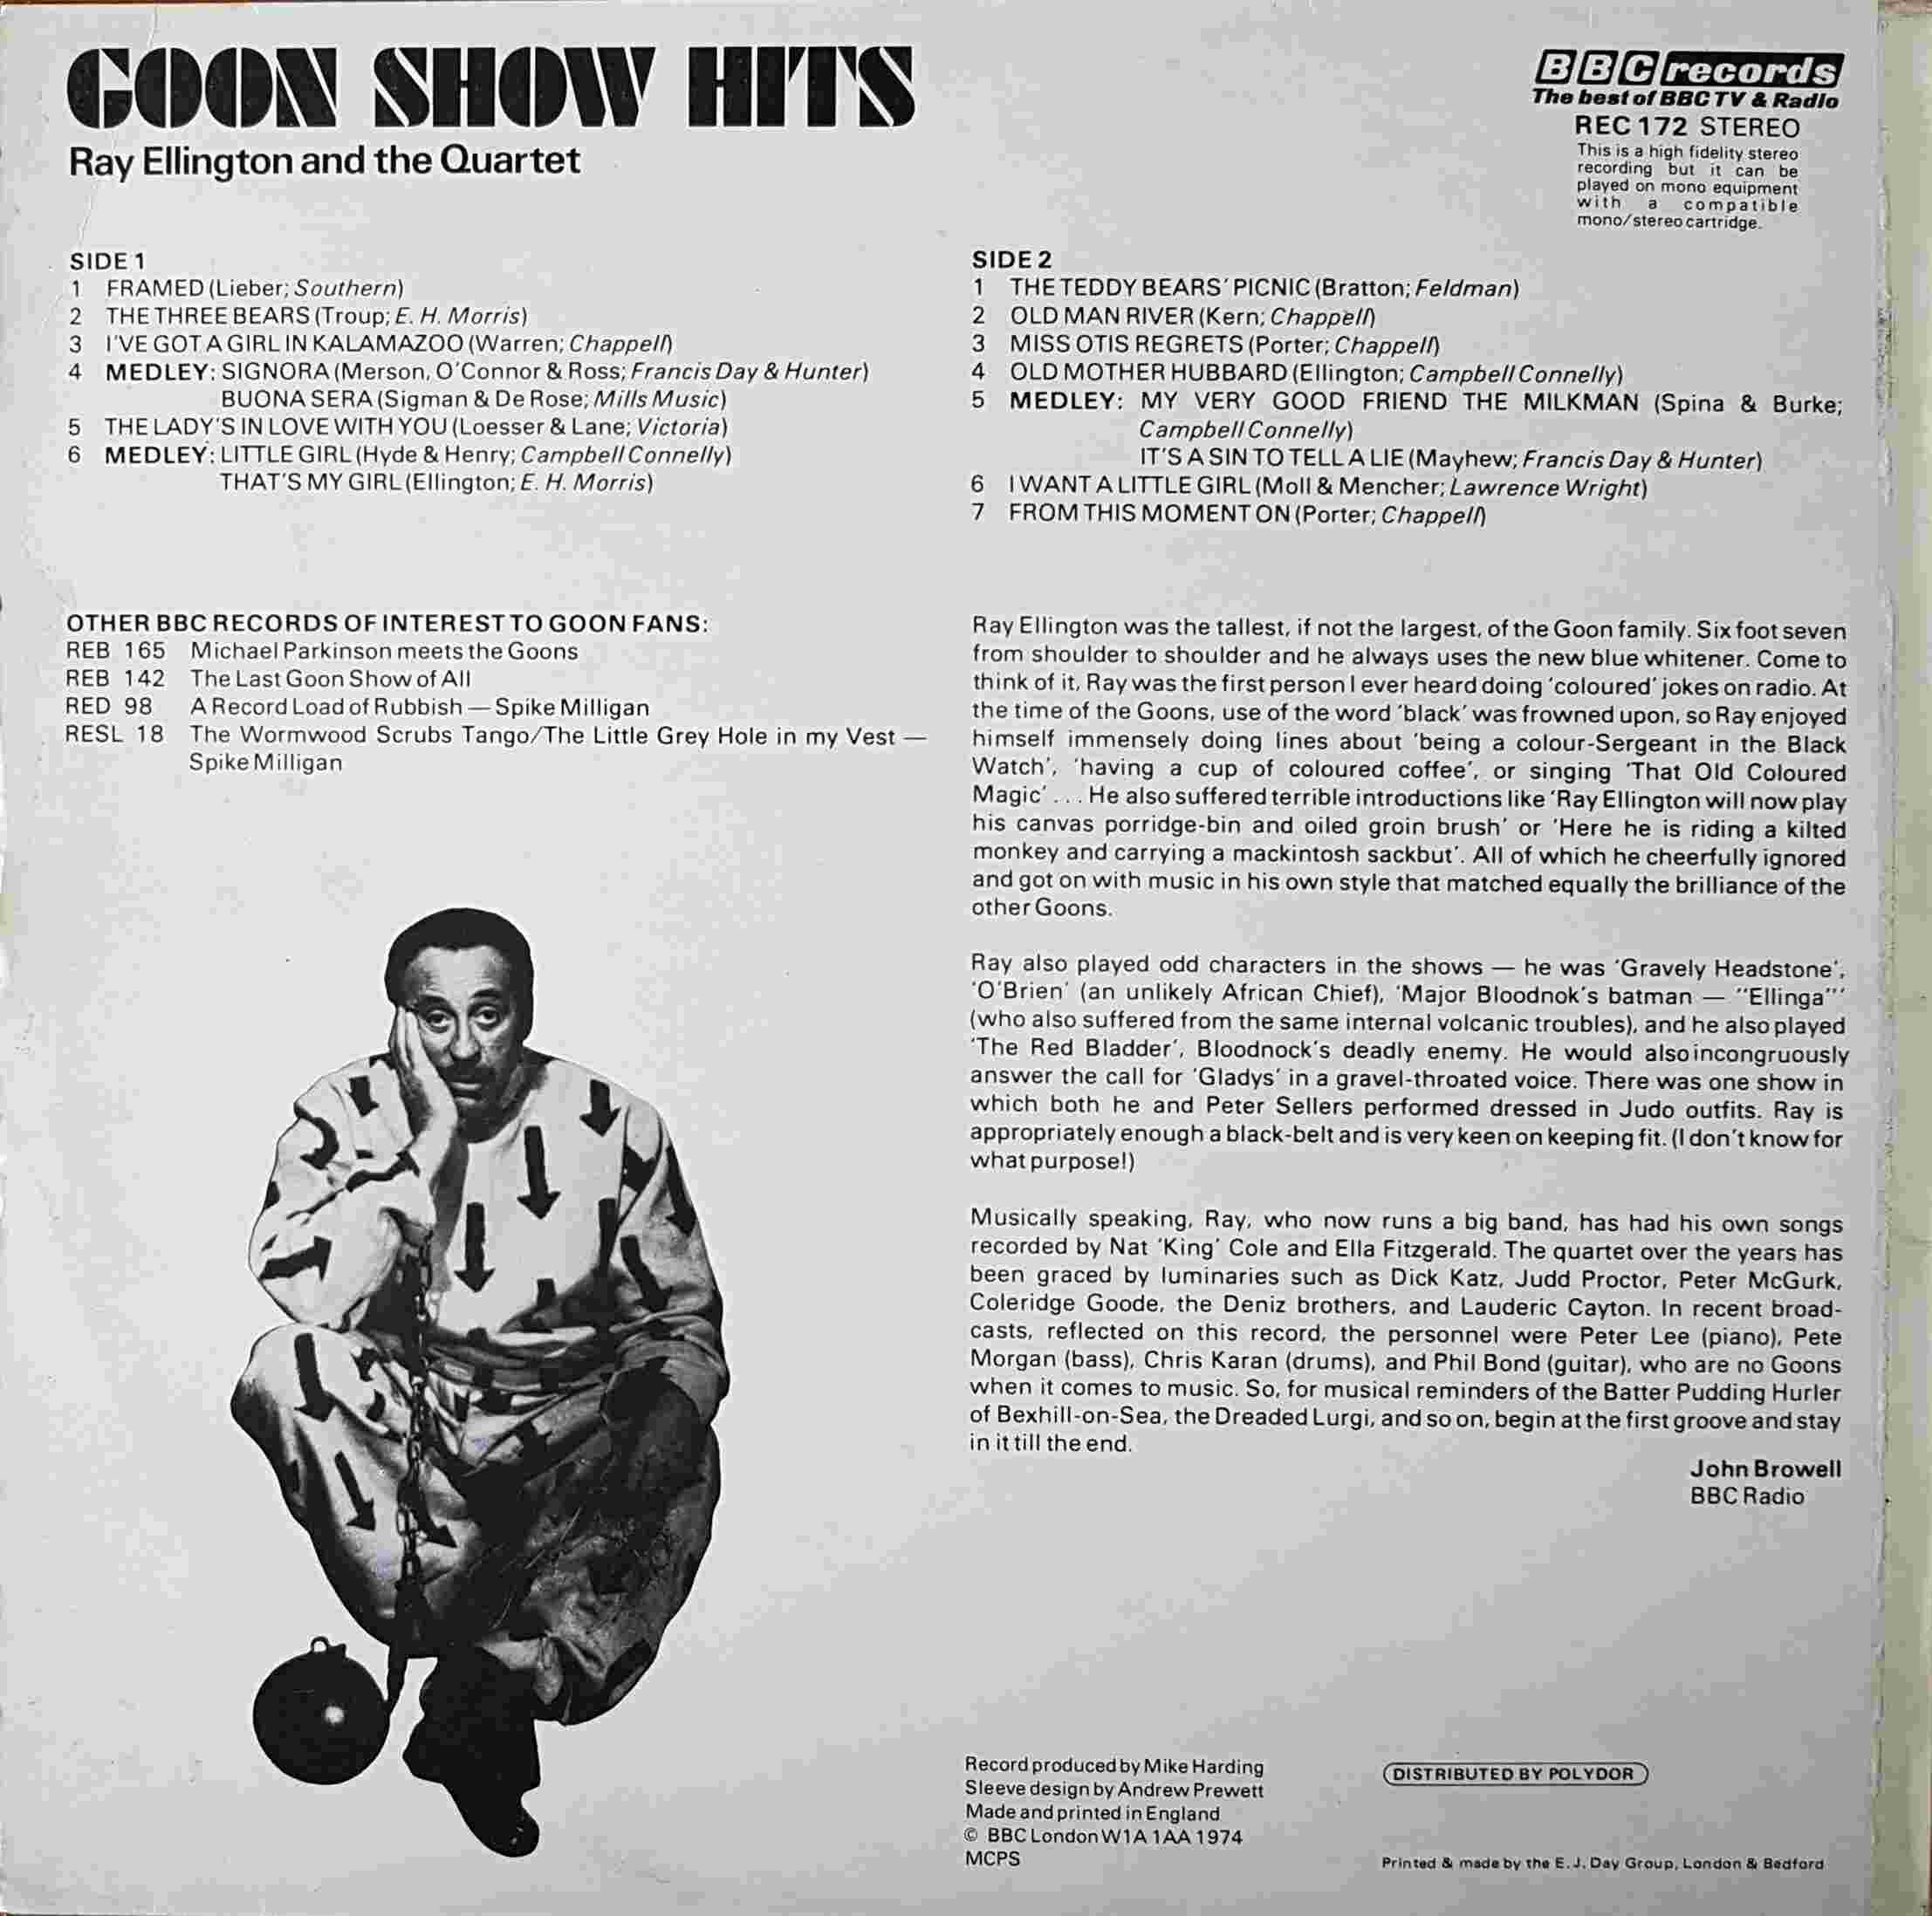 Picture of REC 172 Goon show hits by artist Various from the BBC records and Tapes library